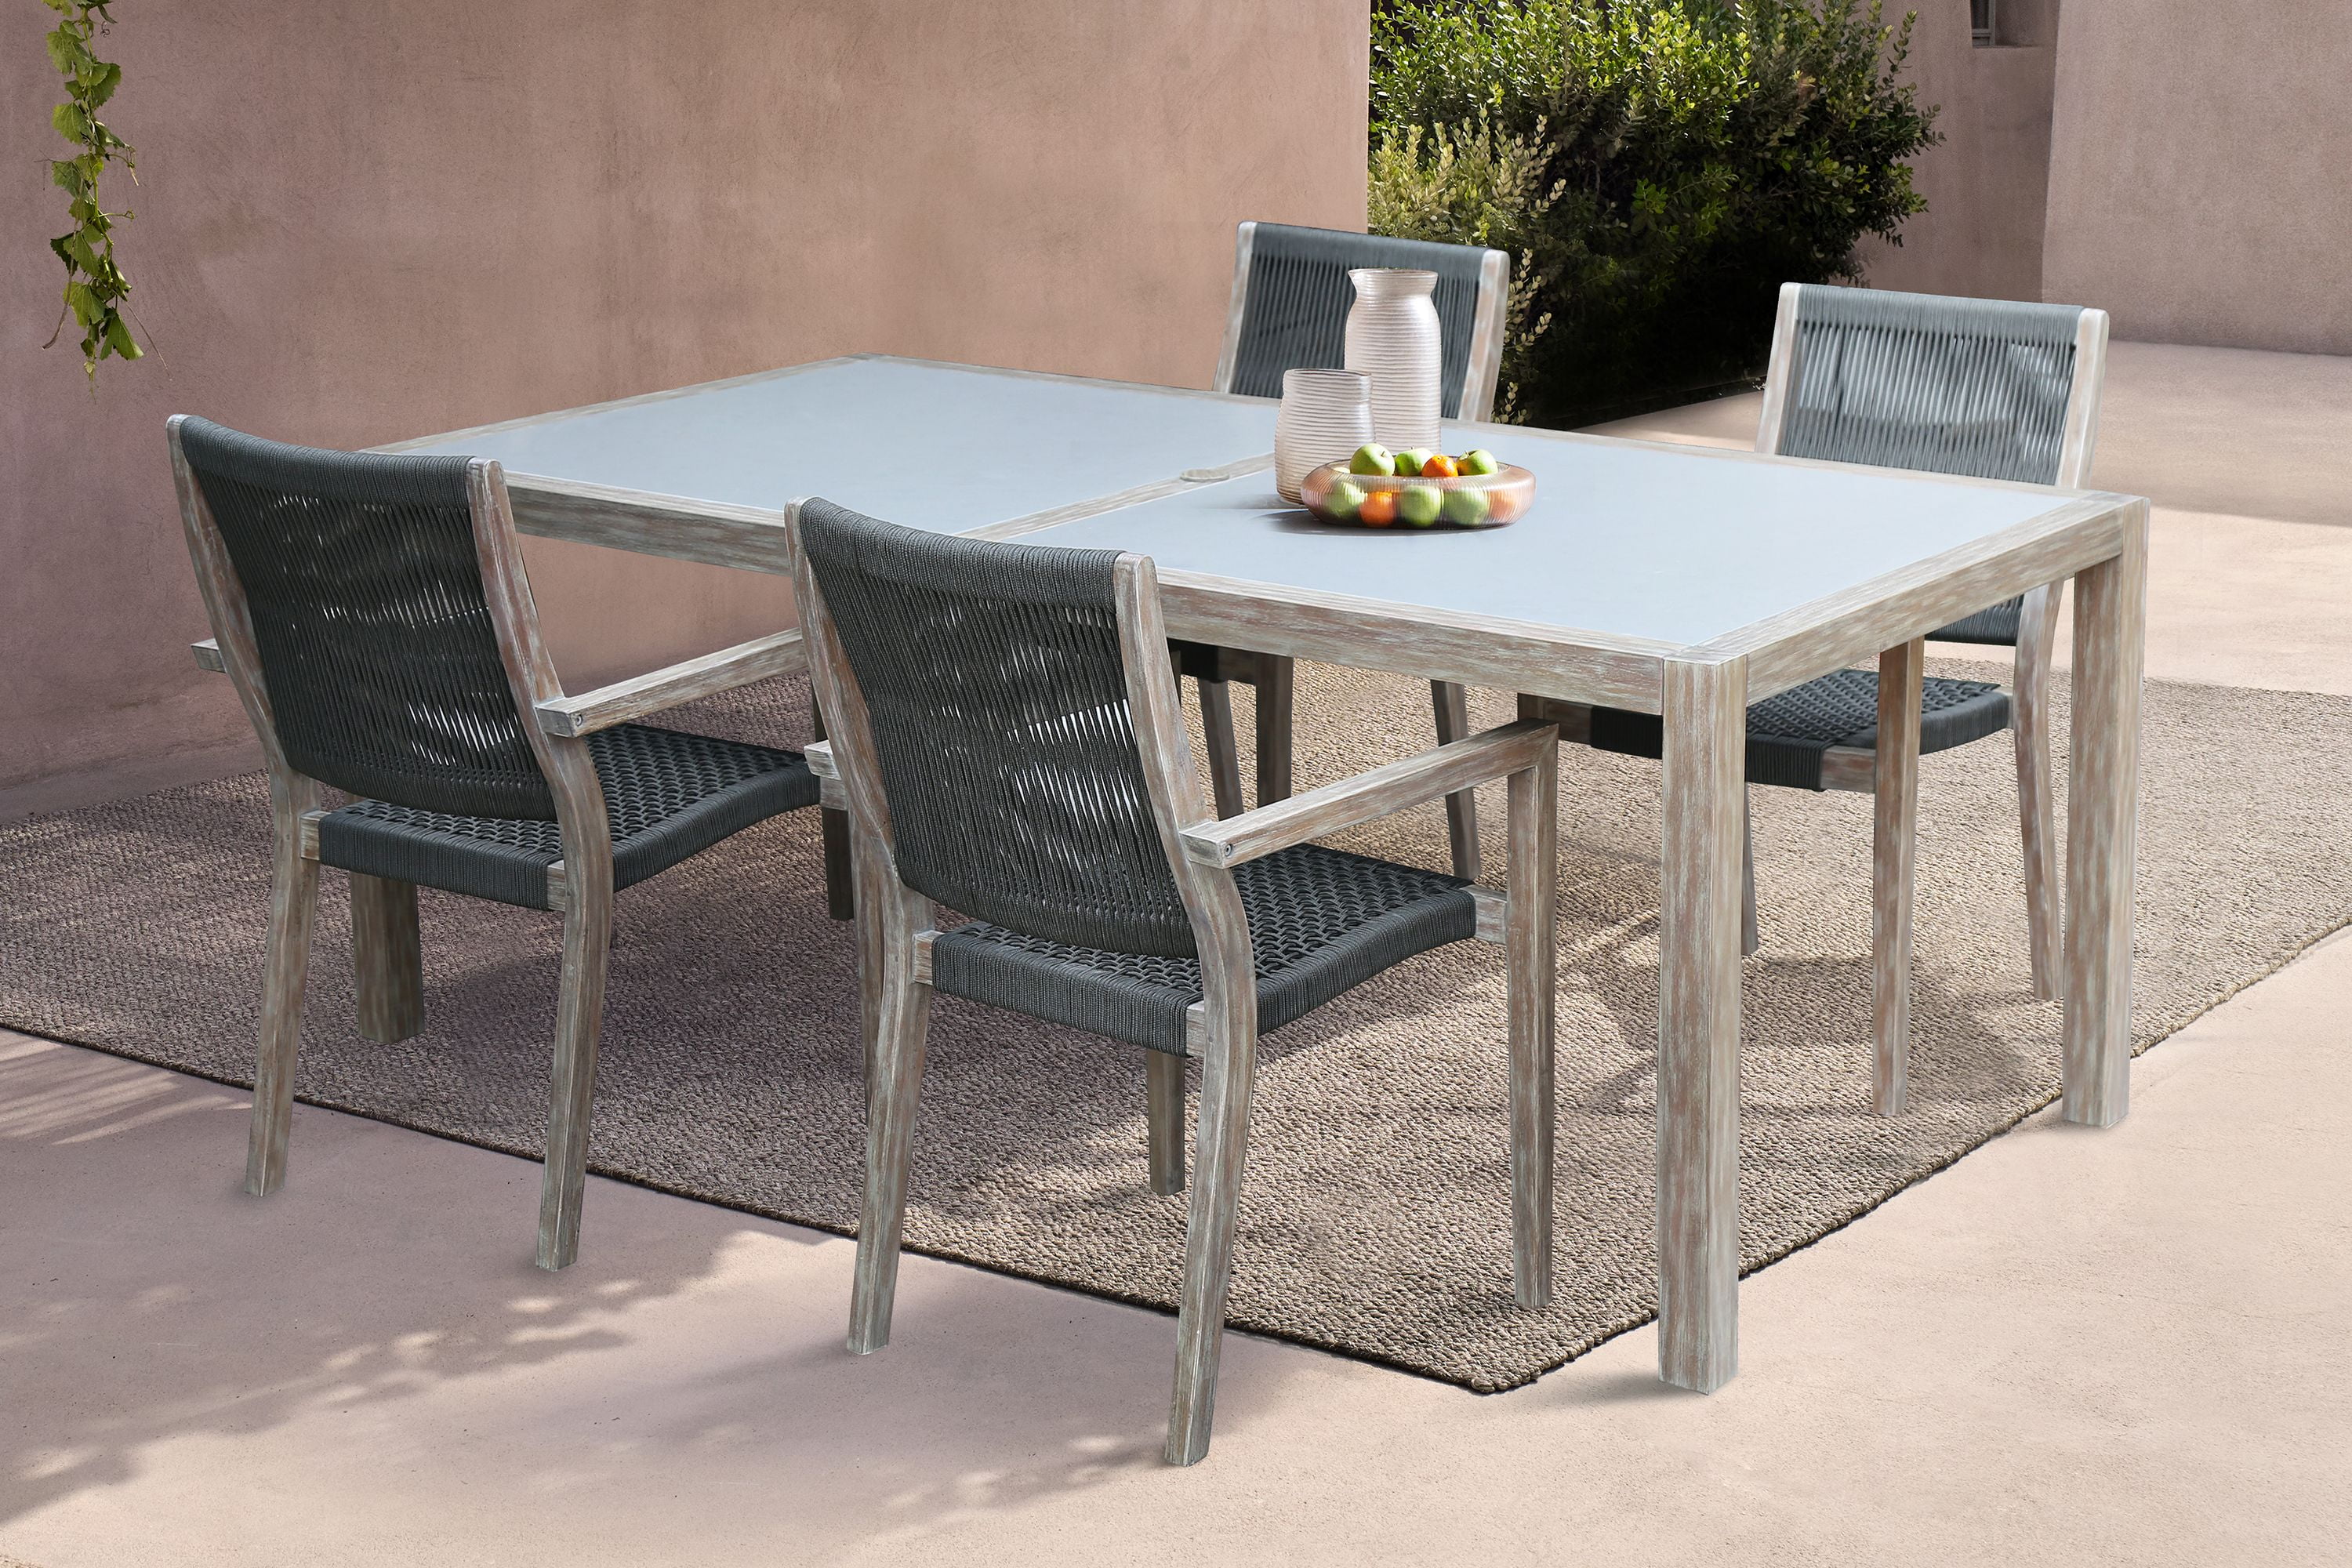 Is This the Perfect 5 Piece Patio Set Under $600: Why the Montclair Collection is Your Best Choice for Outdoor Dining